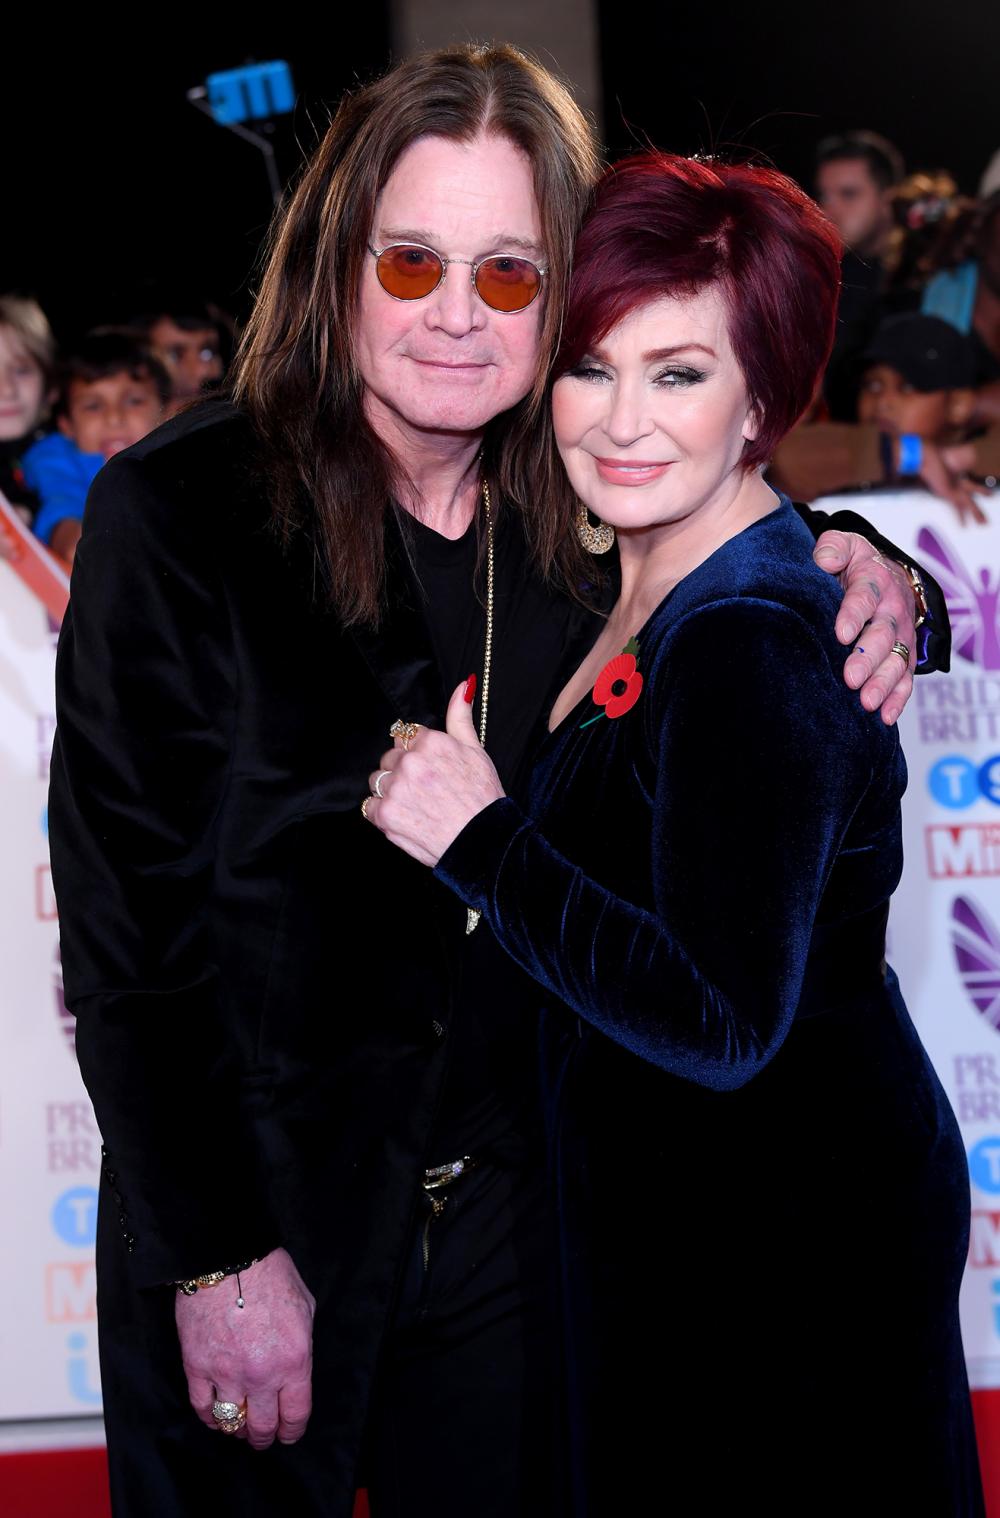 Ozzy Osbourne Reacts to Sharon Osbourne’s ‘The Talk’ Exit After Controversy: I’m on Her ‘Team'